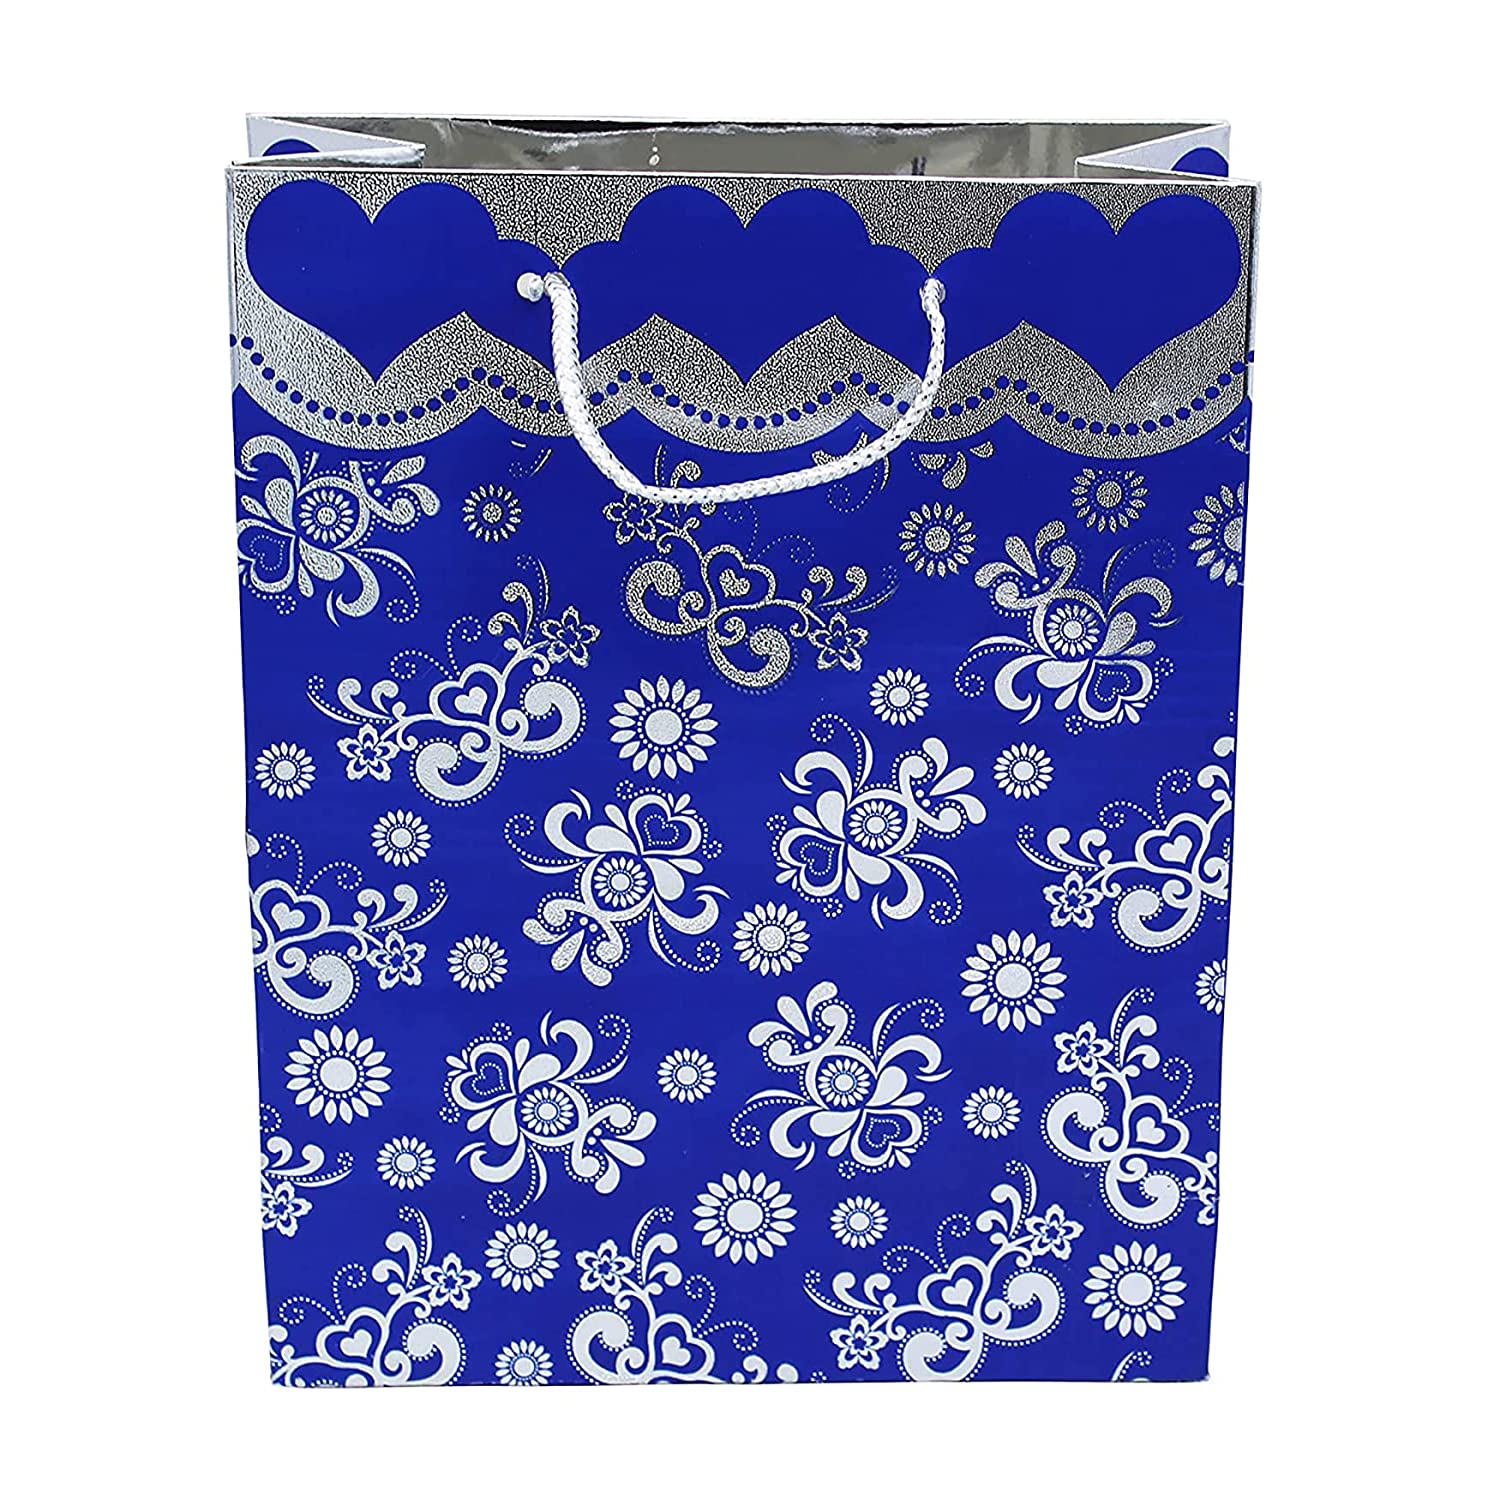 Blue Paper Shopping Gift Bags with Handles